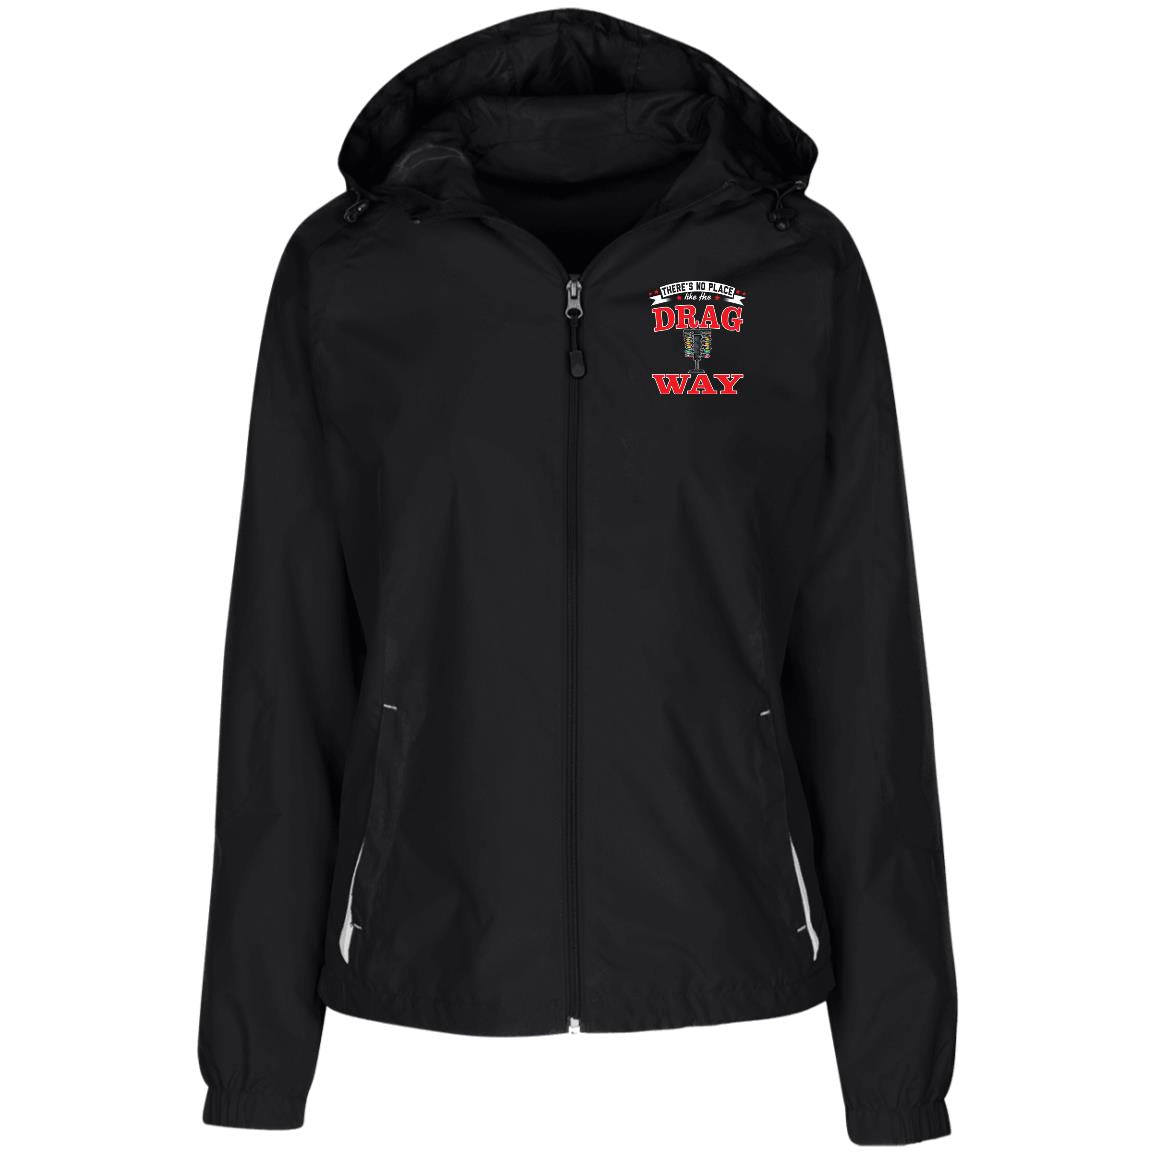 There's No Place Like The Dragway Ladies' Jersey-Lined Hooded Windbreaker